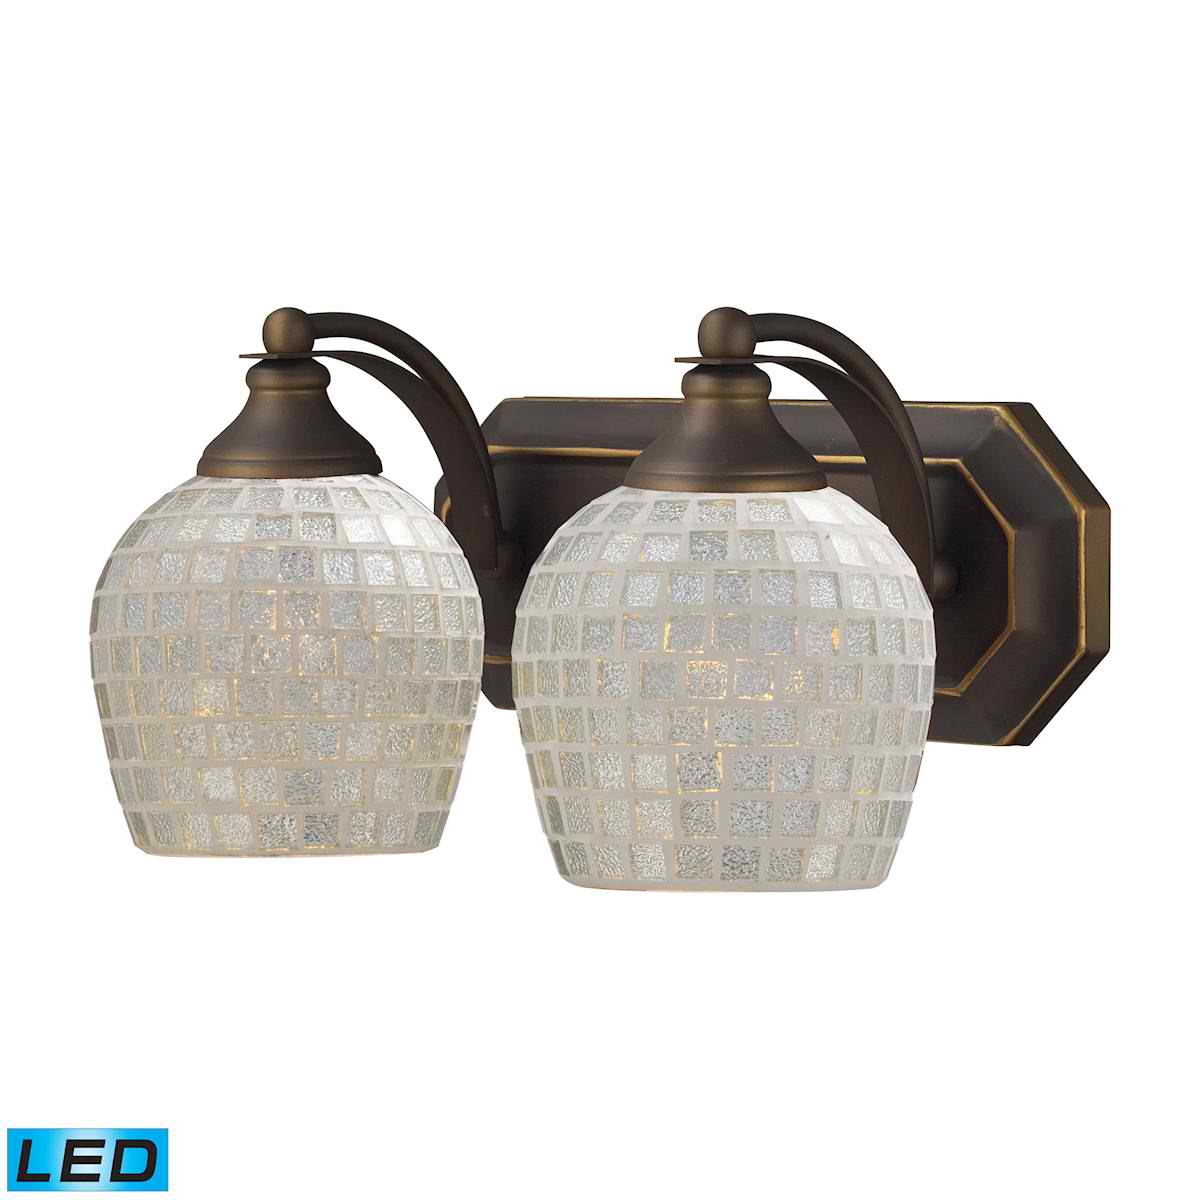 2 Light Vanity in Aged Bronze and Silver Mosaic Glass - LED, 800 Lumens (1600 Lumens Total) with Full Scale